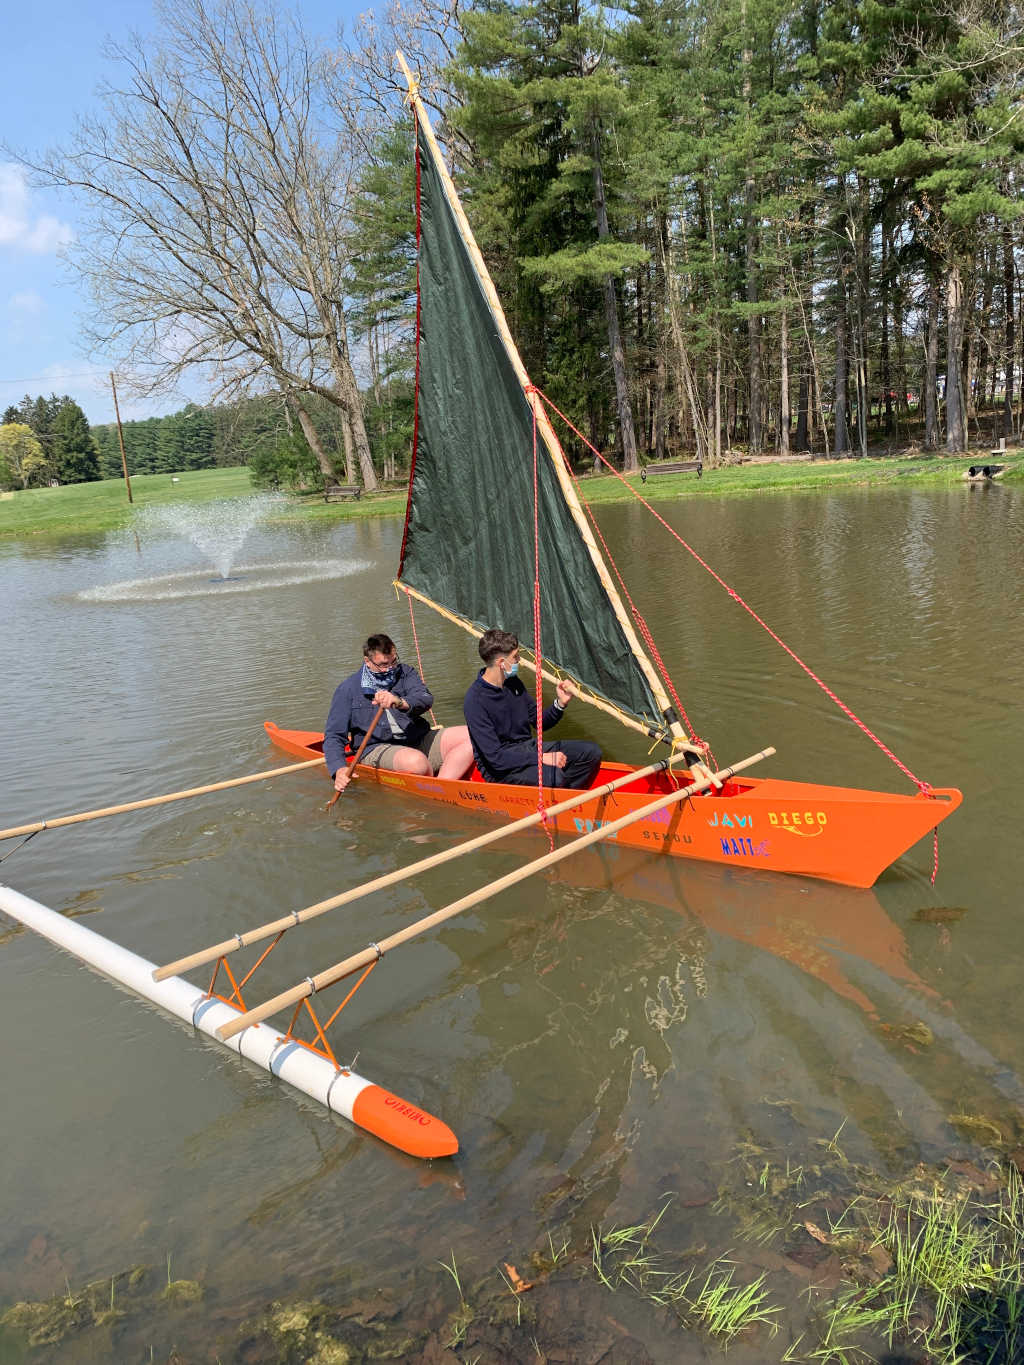 Outrigger canoe on the pond, crewed by two